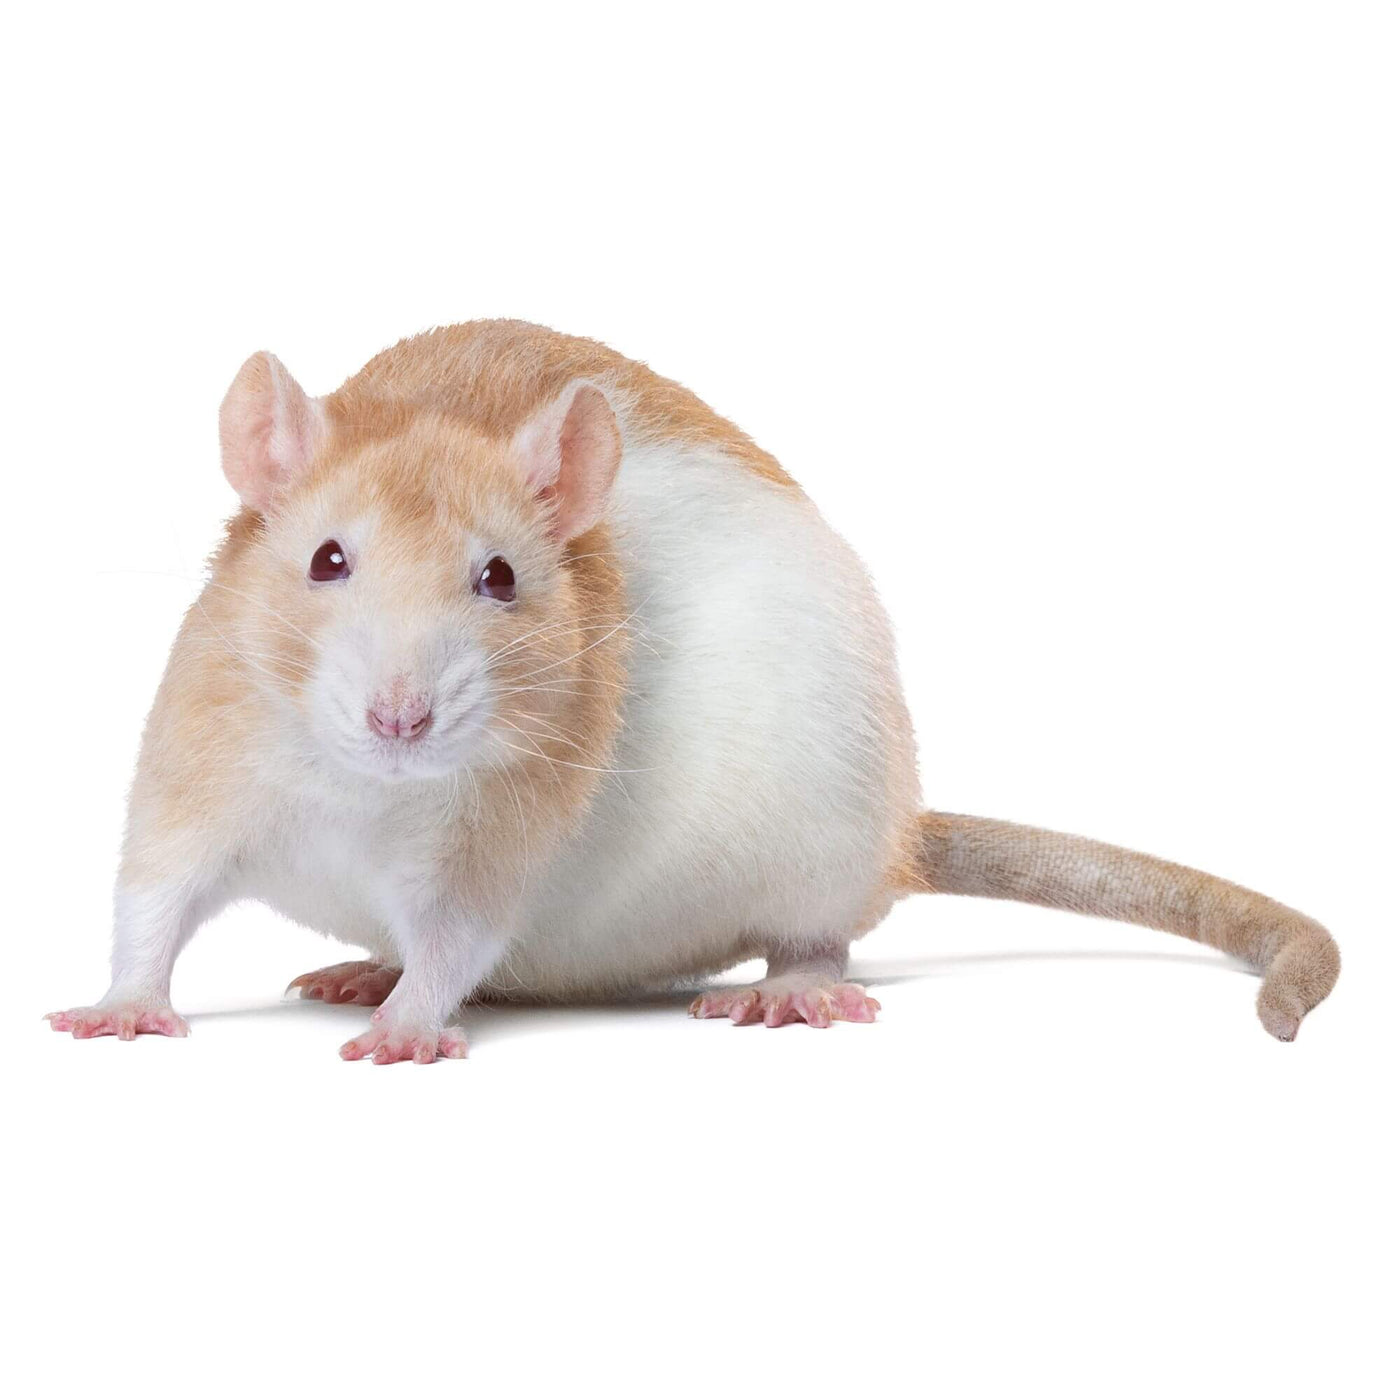 buy live rodents online at cheap prices near you, rats for sale